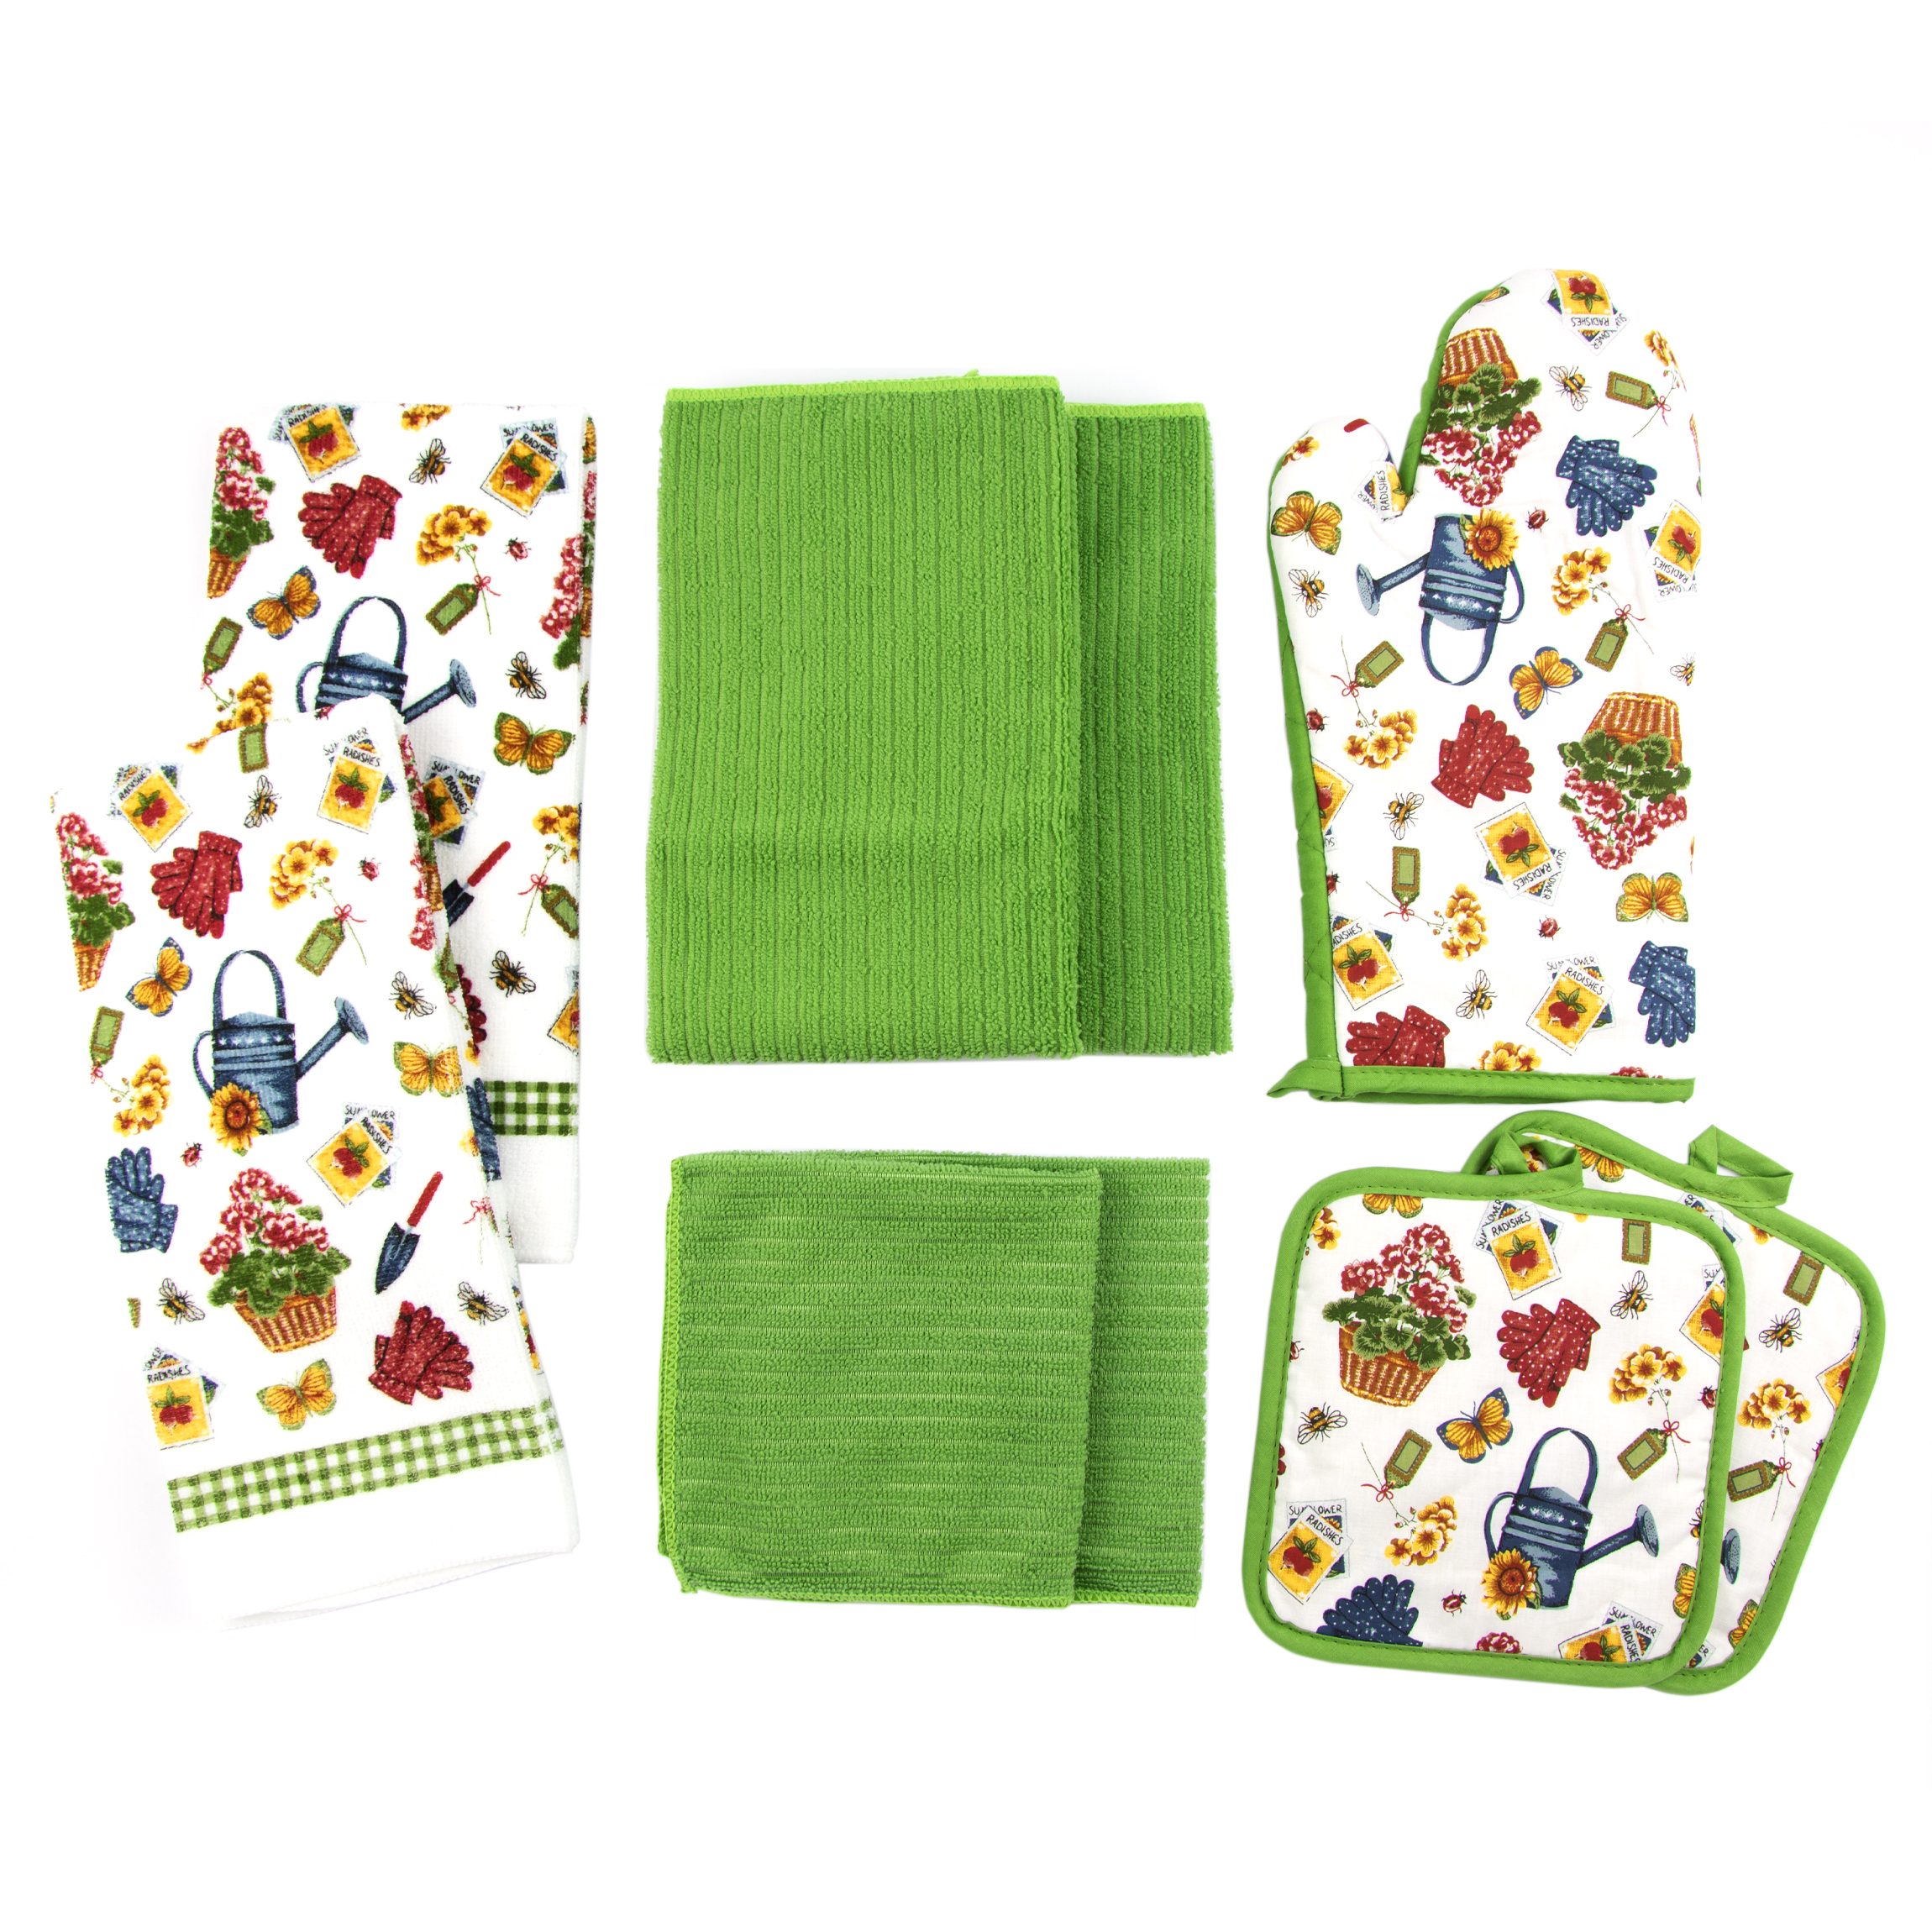 Smart Home 9 PC Garden Delight Kitchen Towel and Pot Holder Set in Green/White